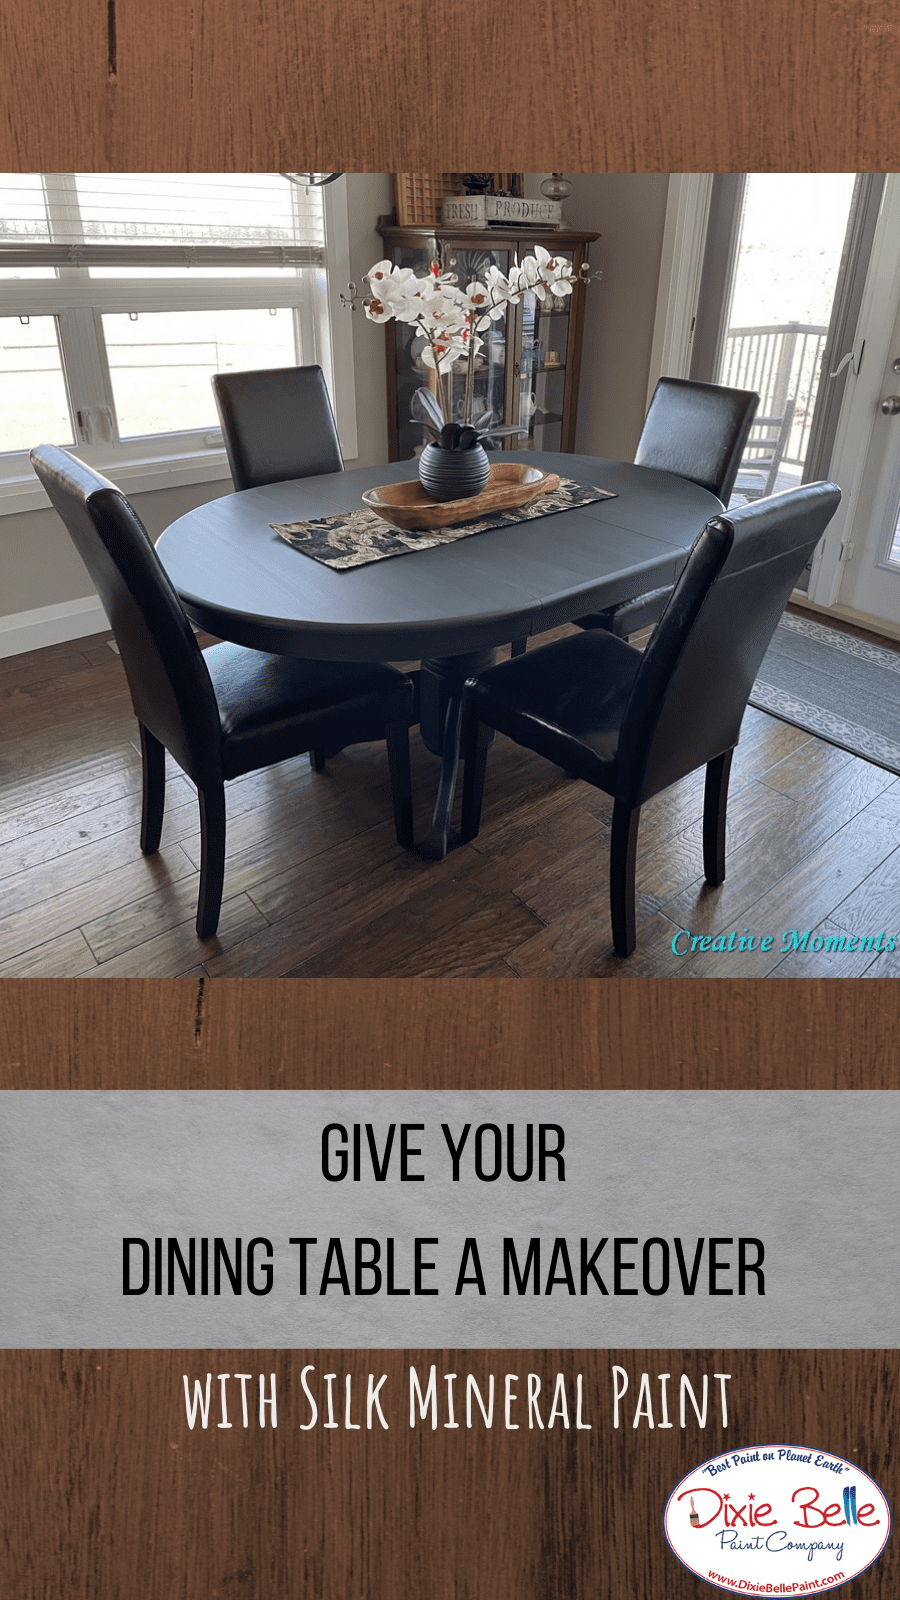 Give Your Dining Table a Makeover!